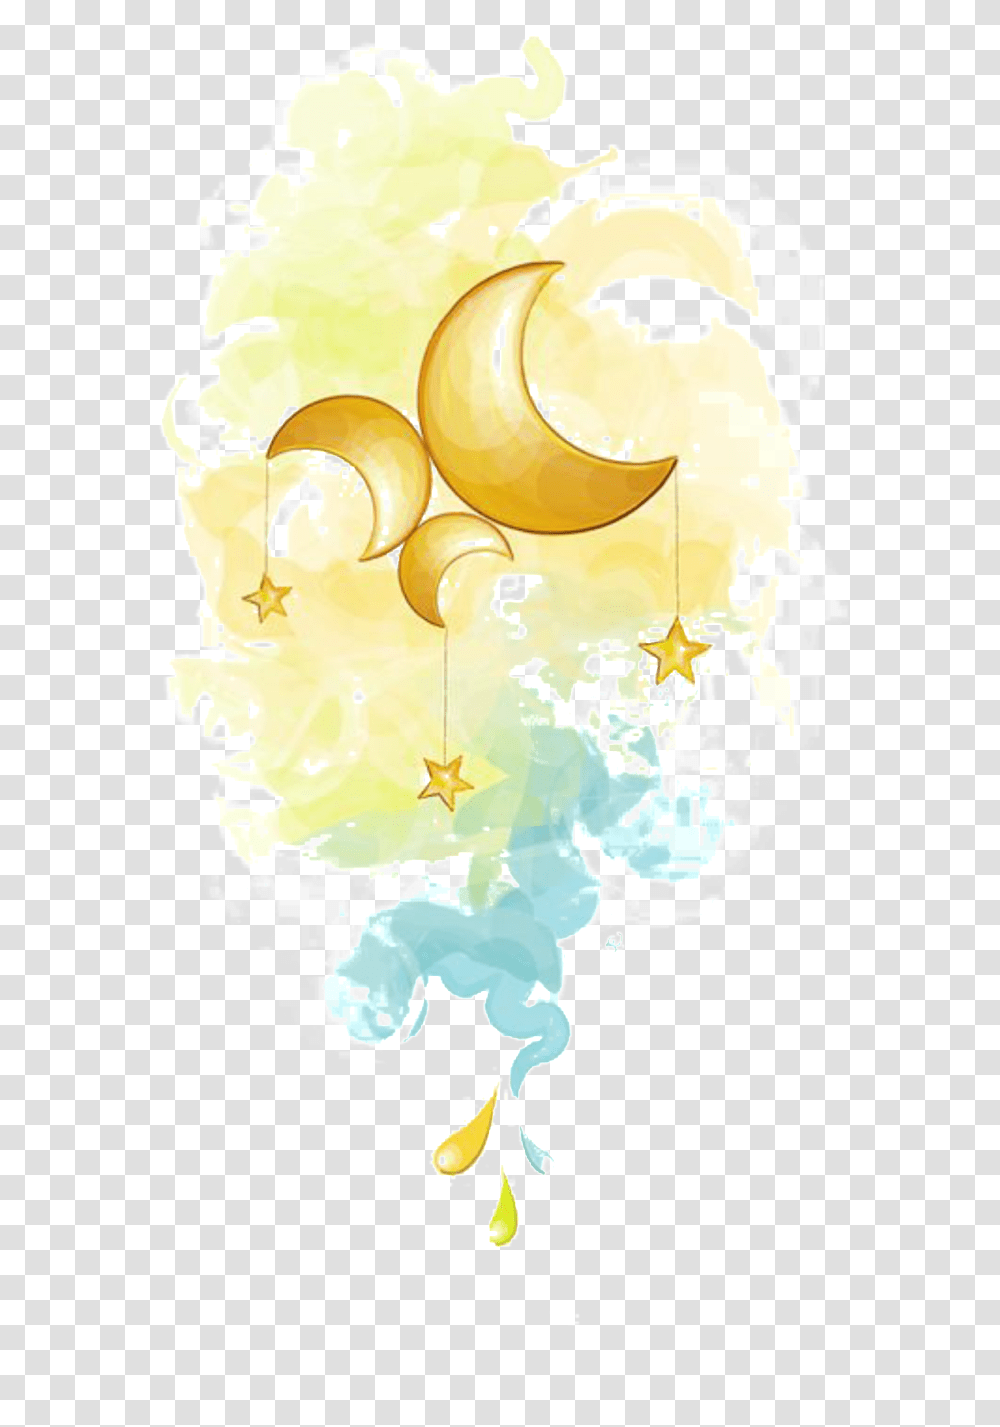 Painted Fairy Moon And Star Pattern Elements Illustration, Plant, Floral Design Transparent Png